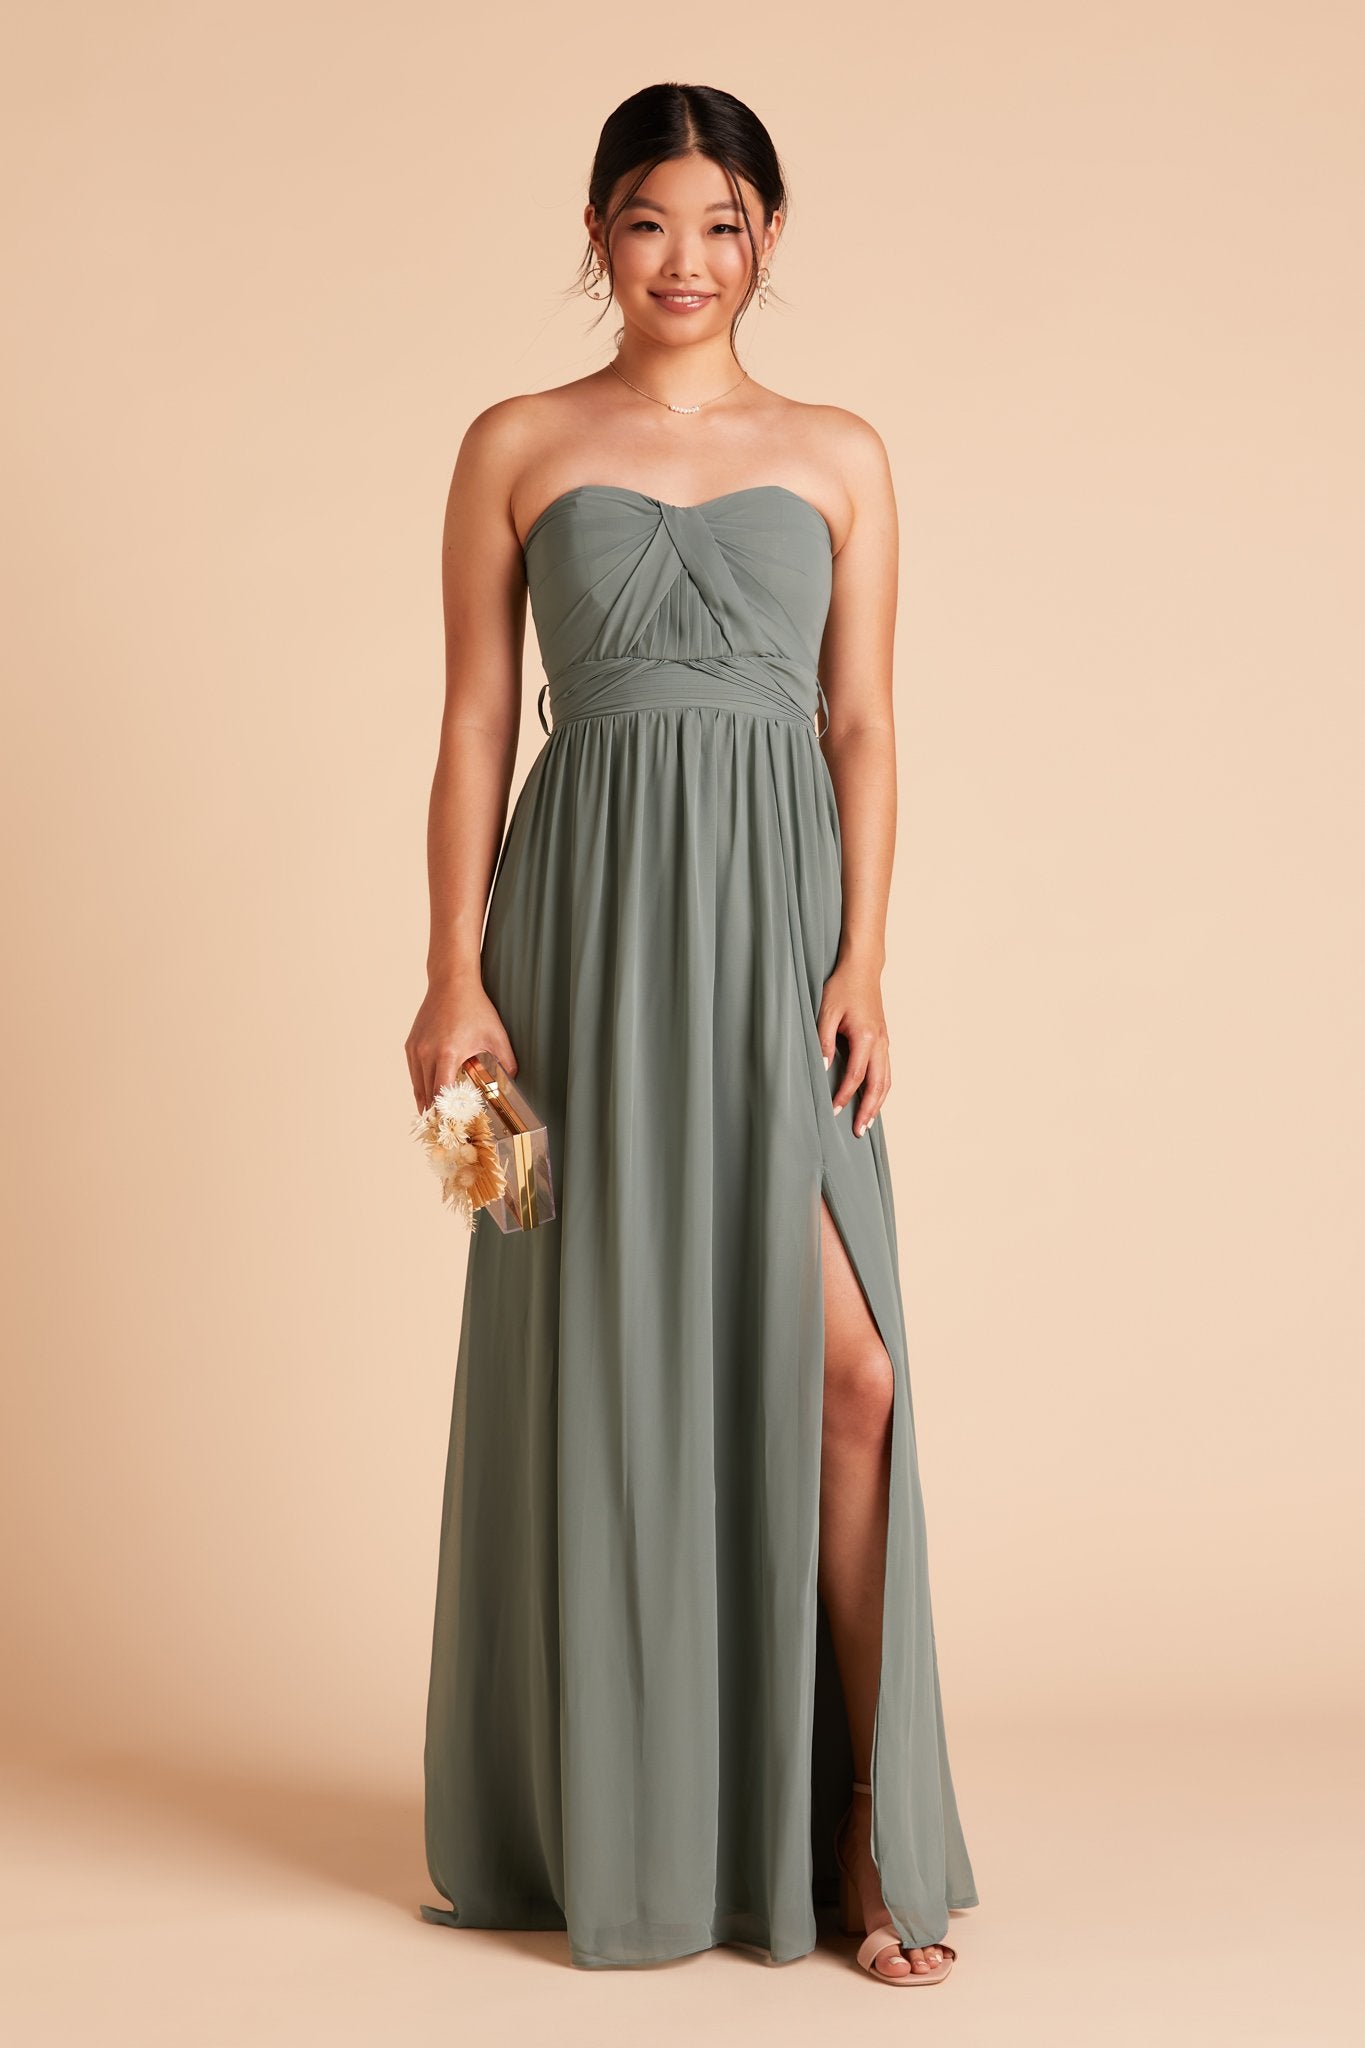 Front view of the floor-length Grace Convertible Bridesmaid Dress in sea glass chiffon features an optional slit in the flowing floor-length skirt over the left leg.